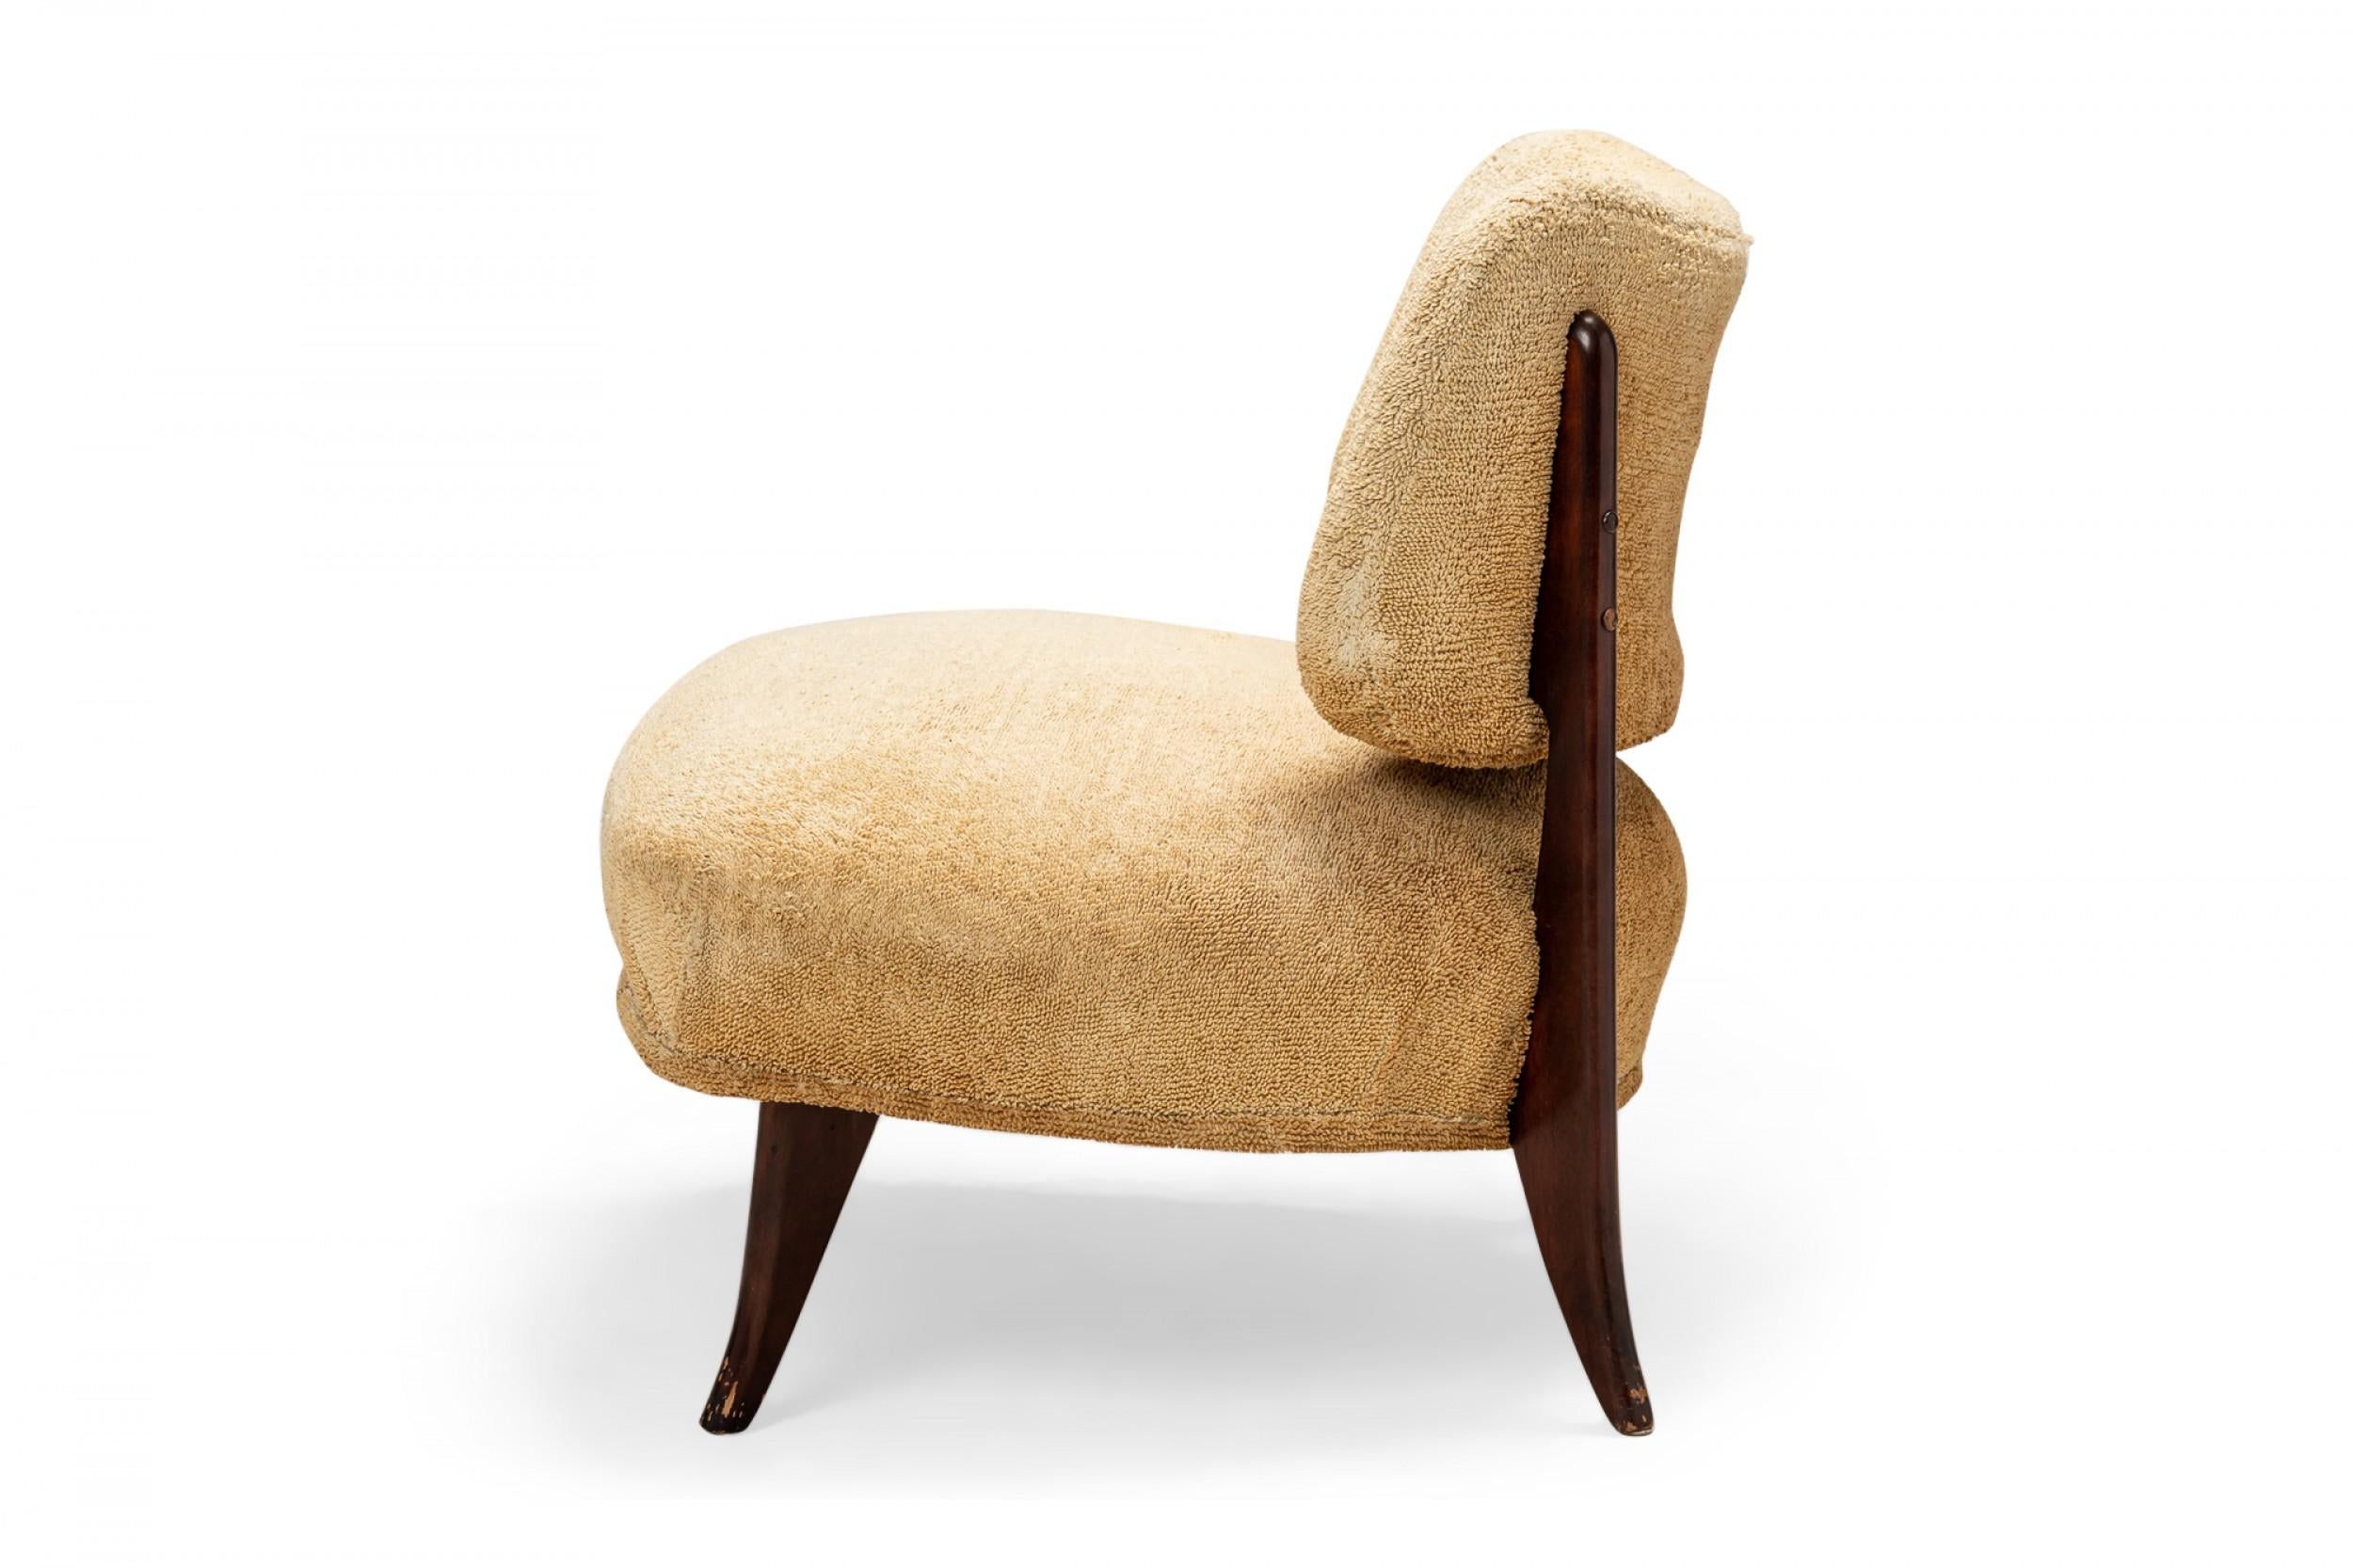 American Art Deco Low Beige Terrycloth Upholstered Slipper Chair In Good Condition For Sale In New York, NY